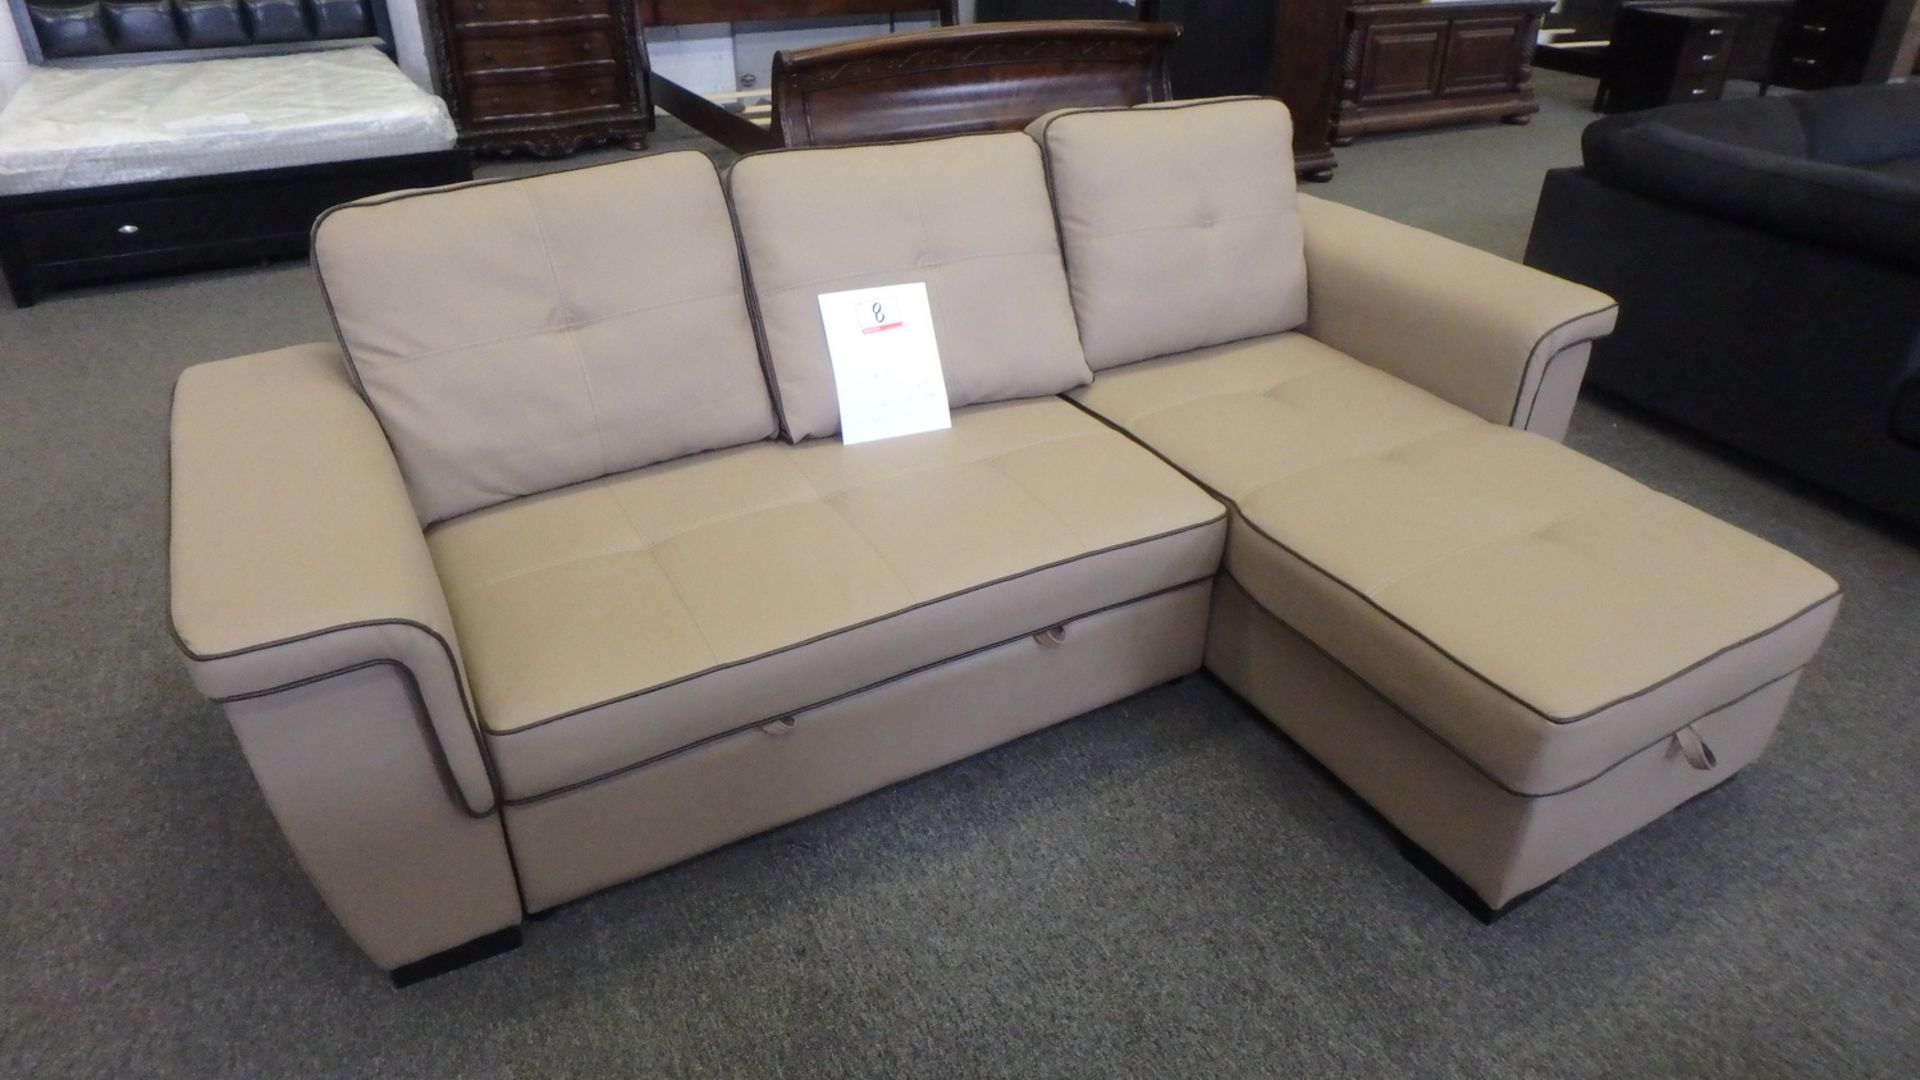 UNITS - LATTE BROWN PU LEATHER SOFA / CONVERTIBLE BED C/W STORAGE CHAISE (LK-BEATRICE) NEW)